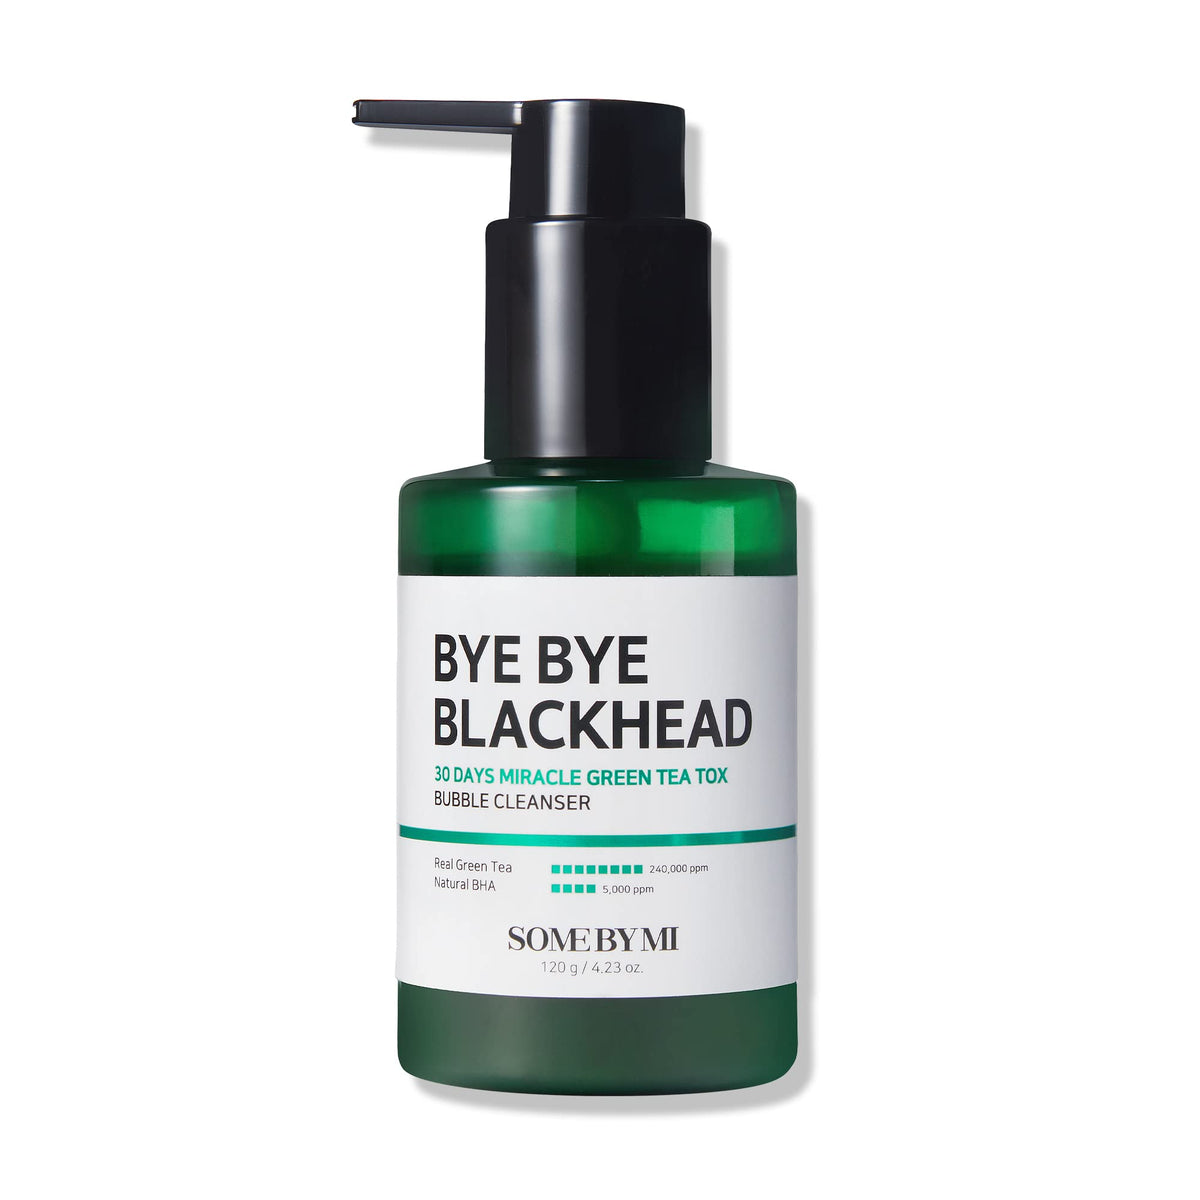 Some By Mi Bye Bye Black Head 30Days Miracle Green Tea Tox Bubble Cleanser 120g - Makeupstash Pakistan - Some By Mi